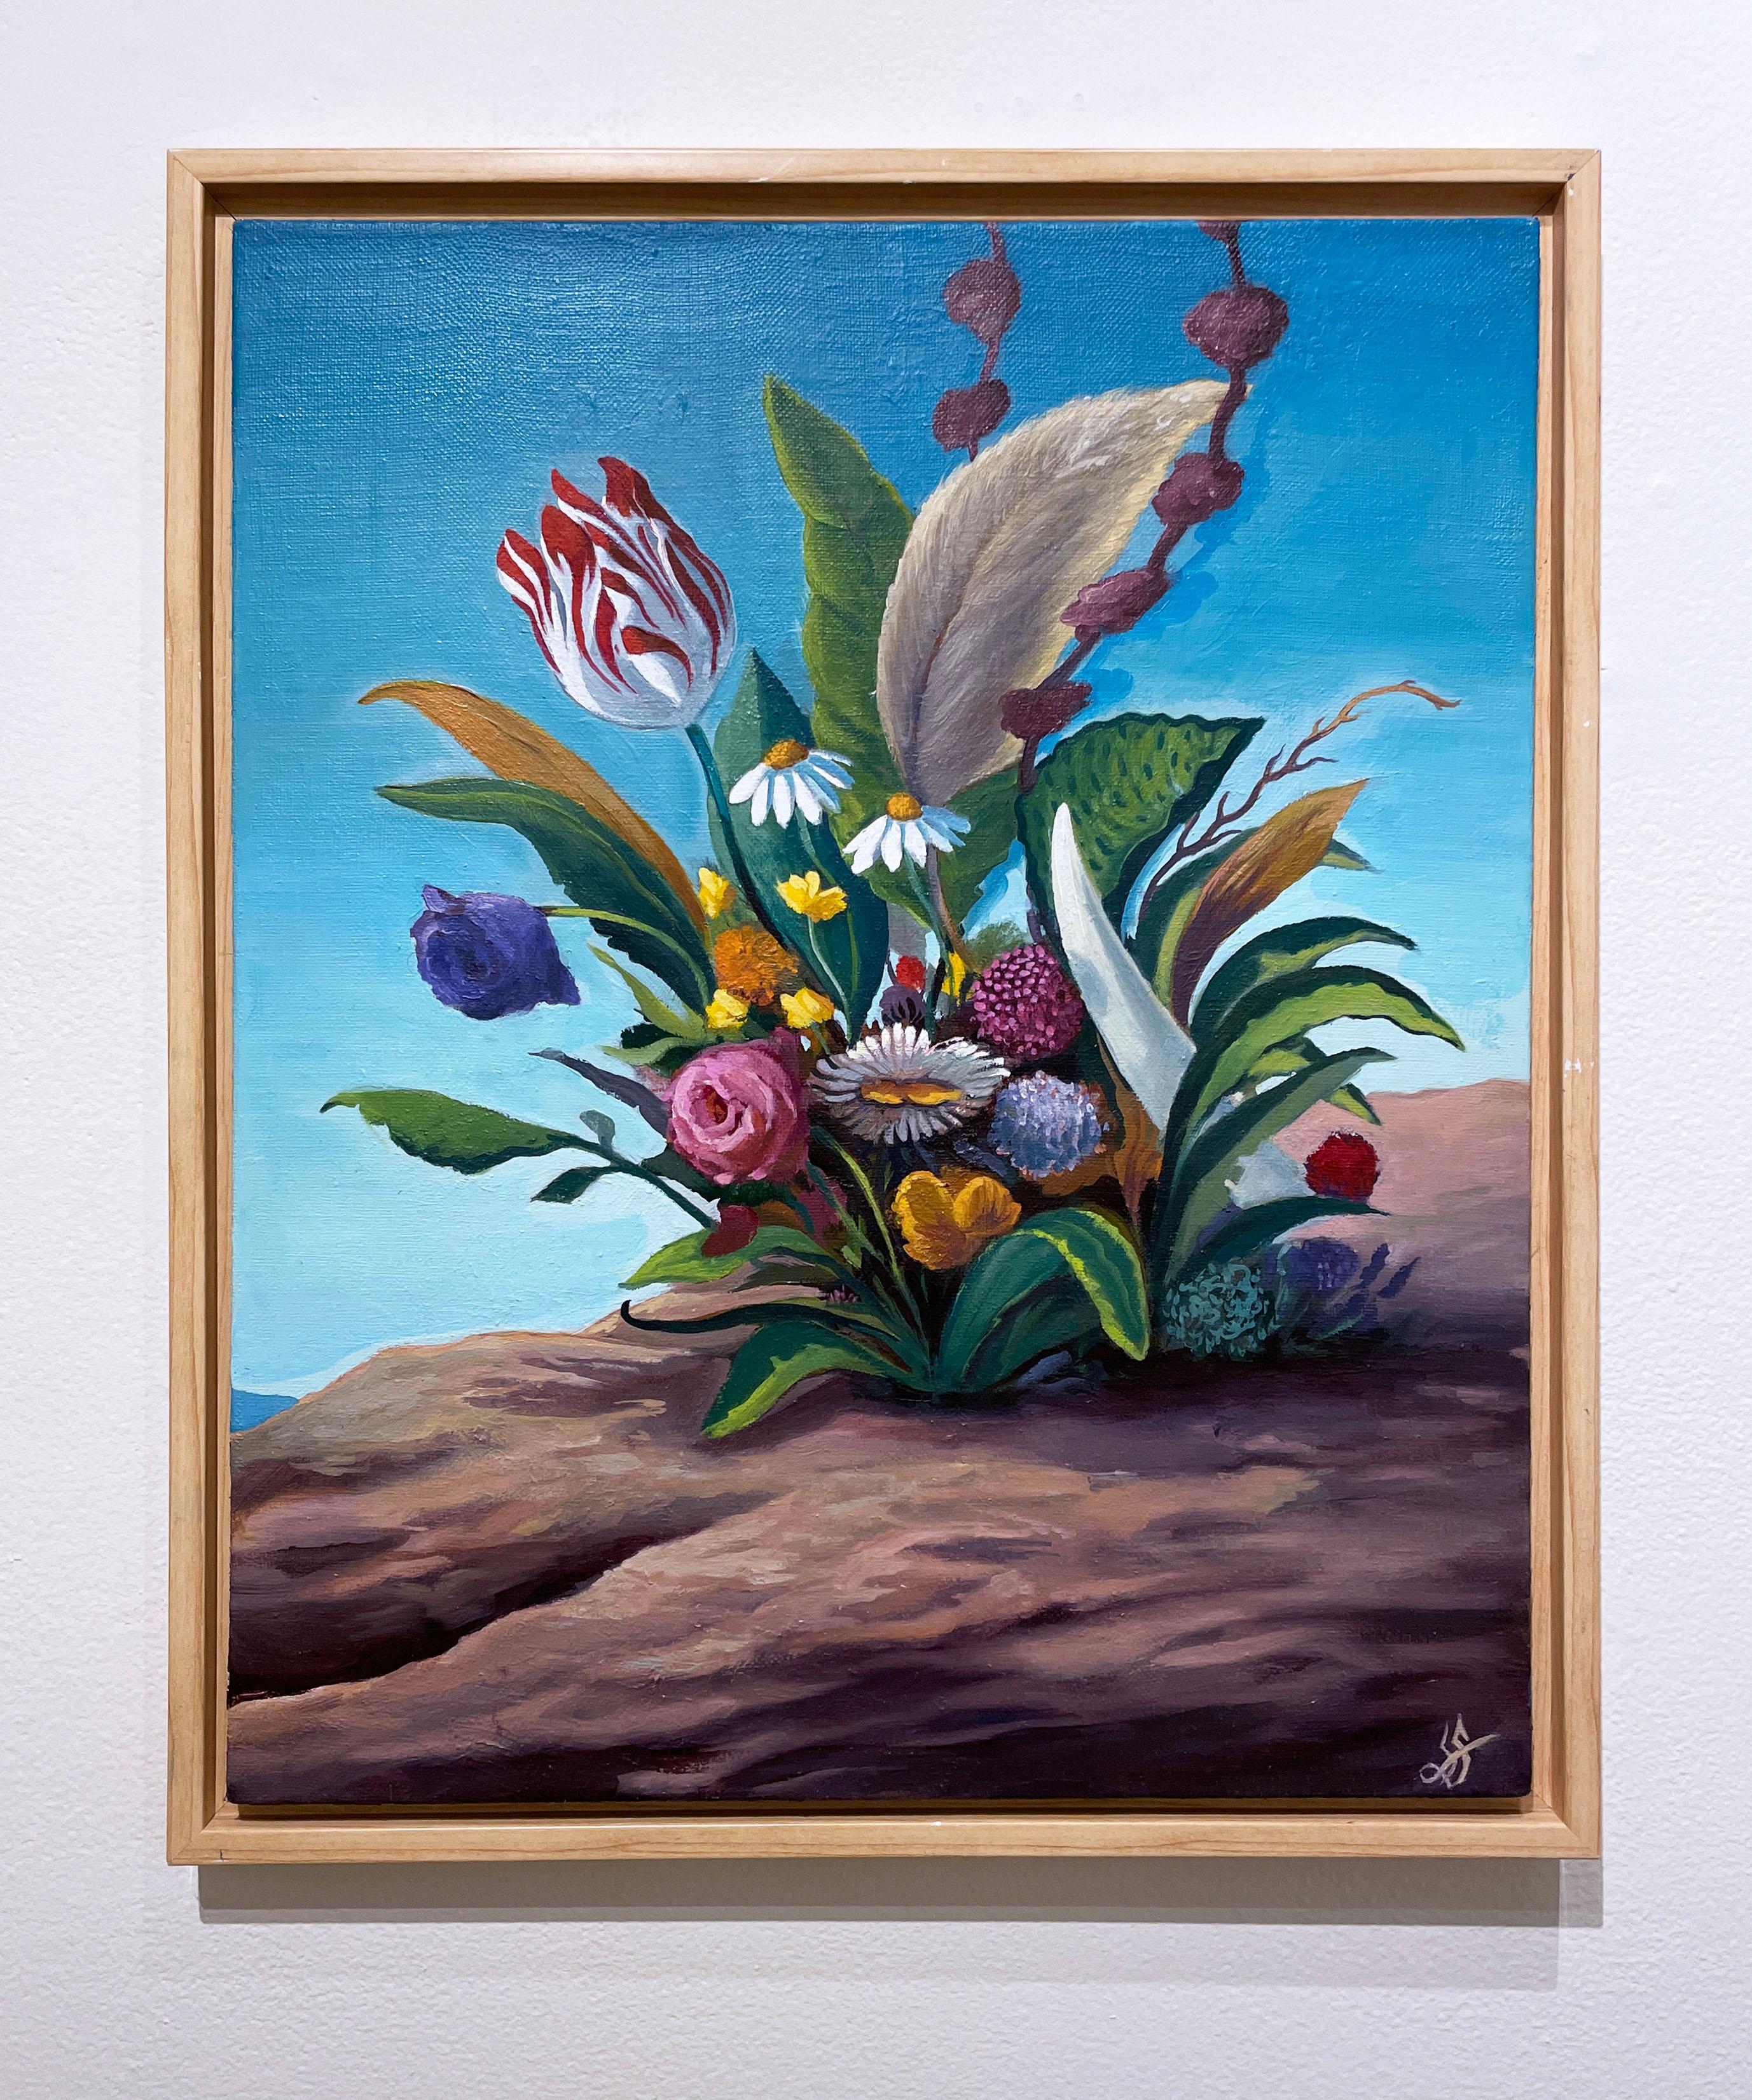 The Miracle (2021), oil on linen, landscape, skyscape, flowers, garden, floral - Painting by Fabricio Suarez